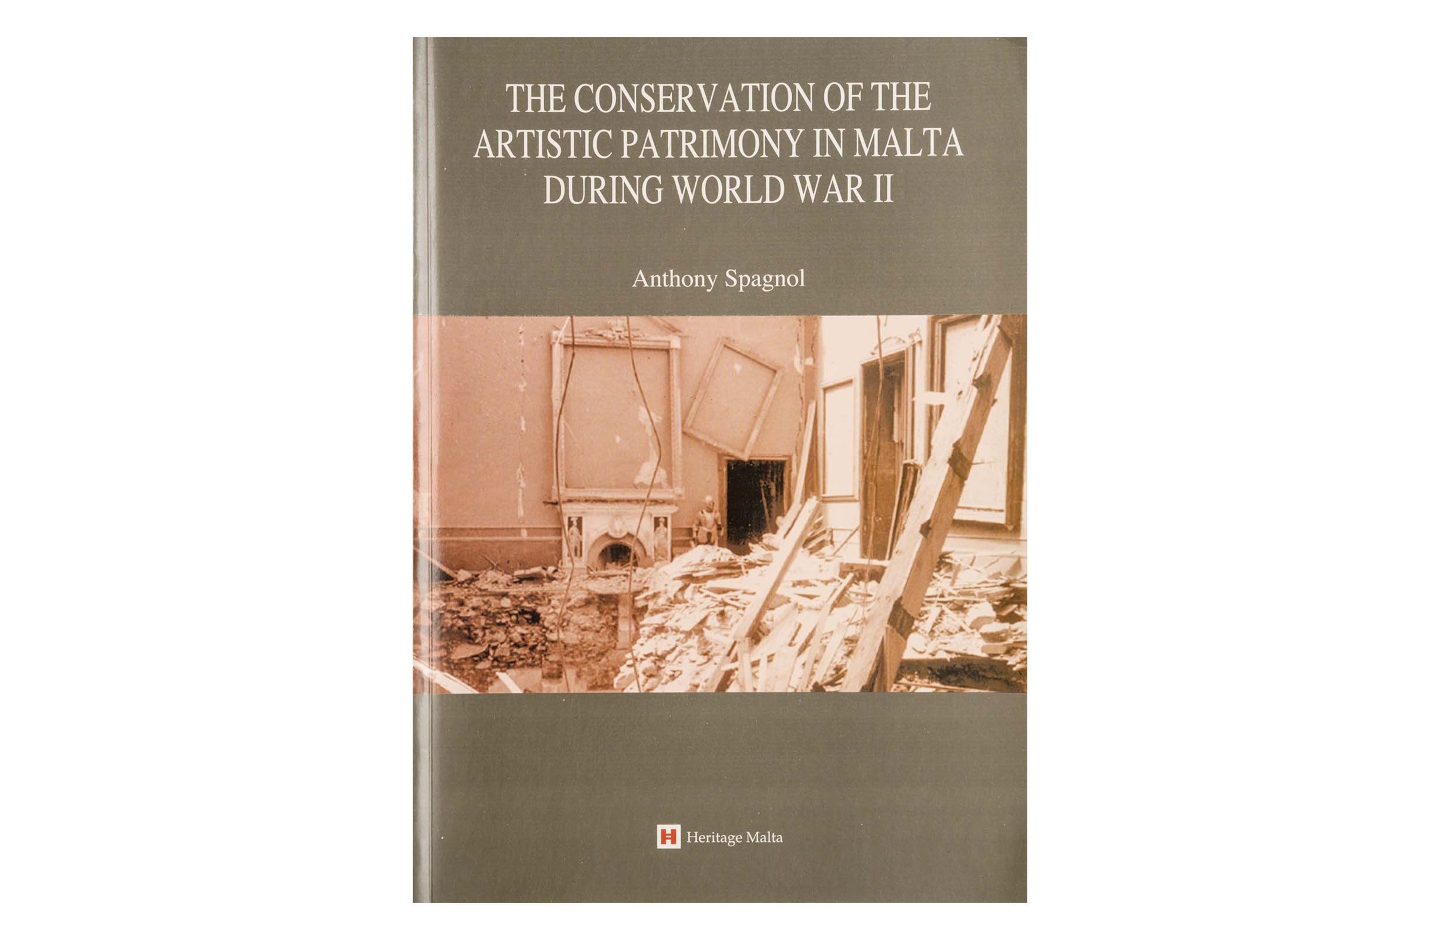 The Conservation of the Artistic Patrimony in Malta During World War II